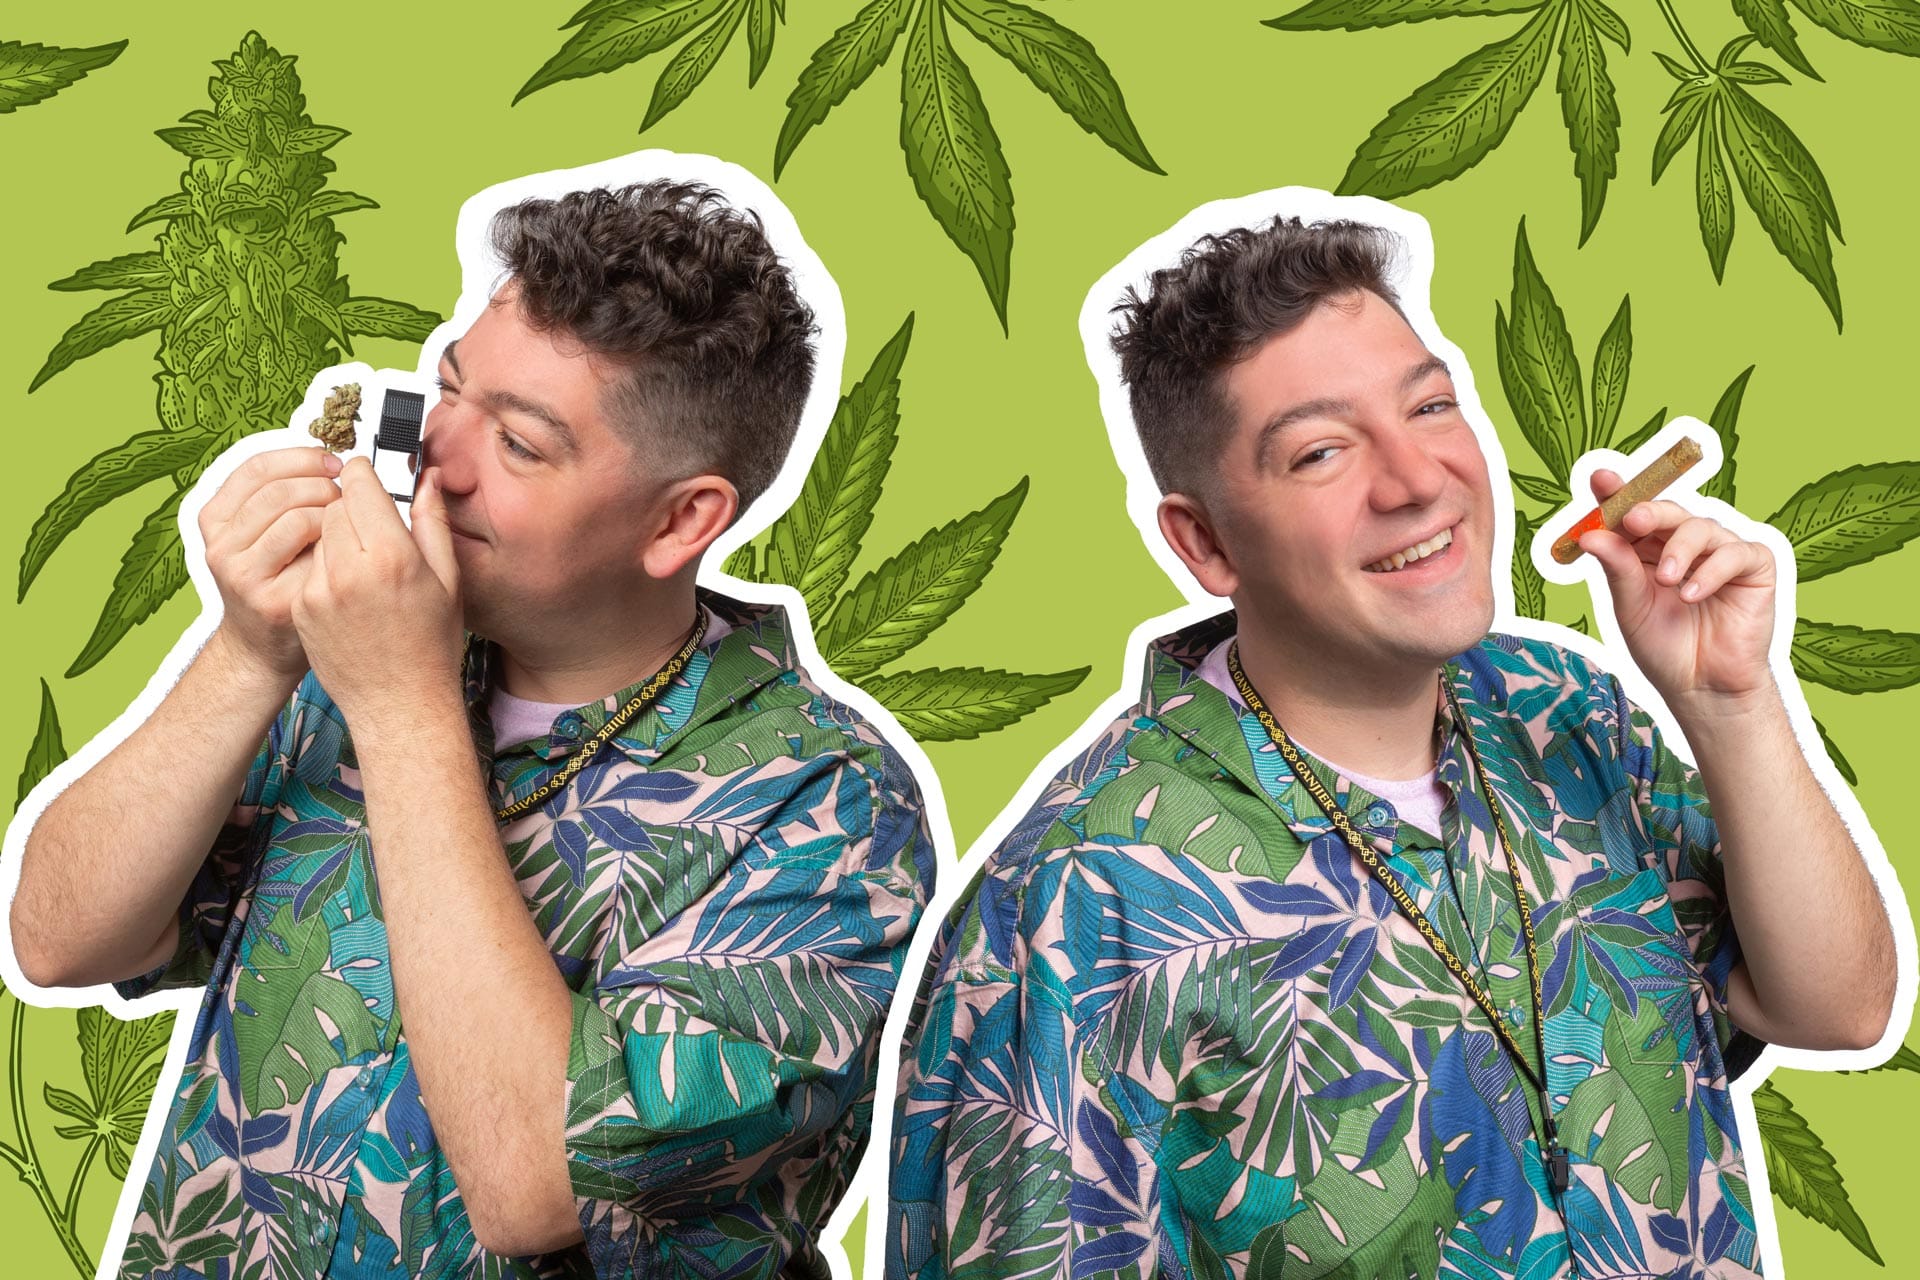 Two images of Lightshade’s Director of Inventory and Purchasing, Zach York, holding cannabis products over an illustrated cannabis background